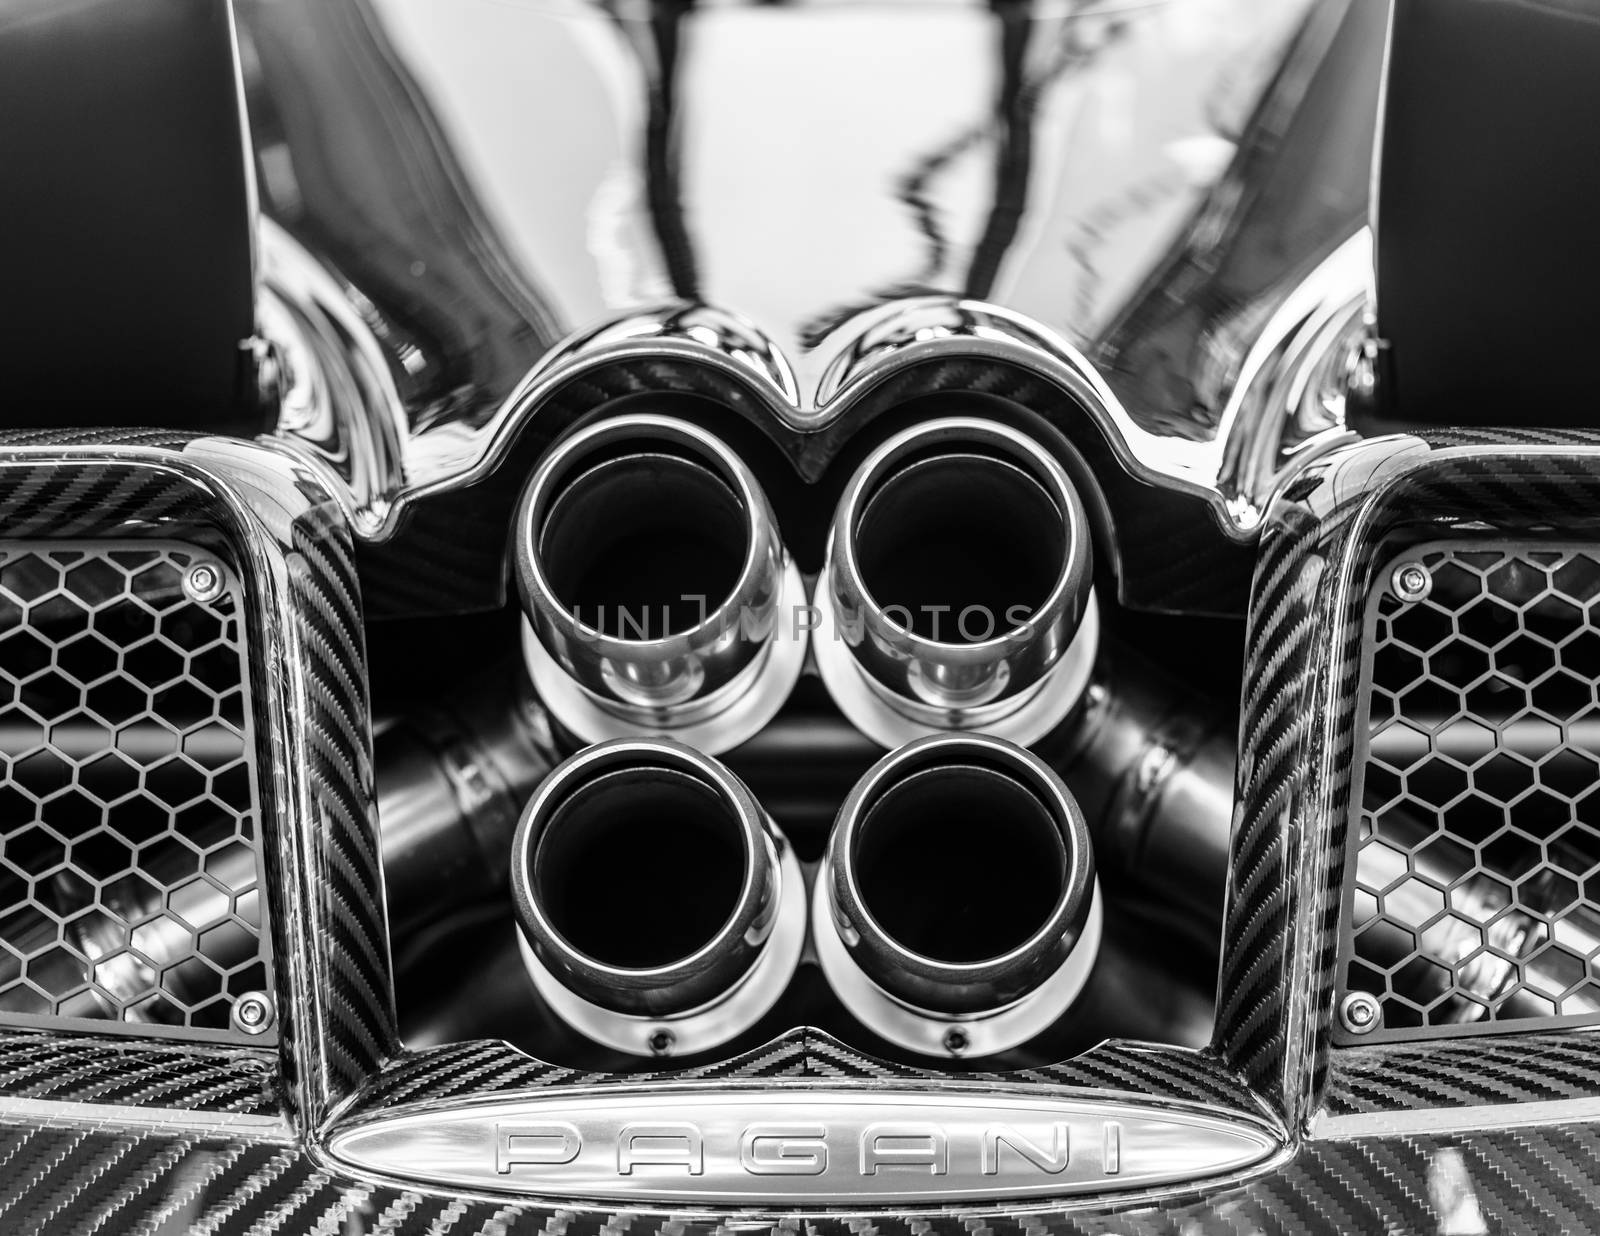 Pagani Huayra exhaust in black and white by dutourdumonde